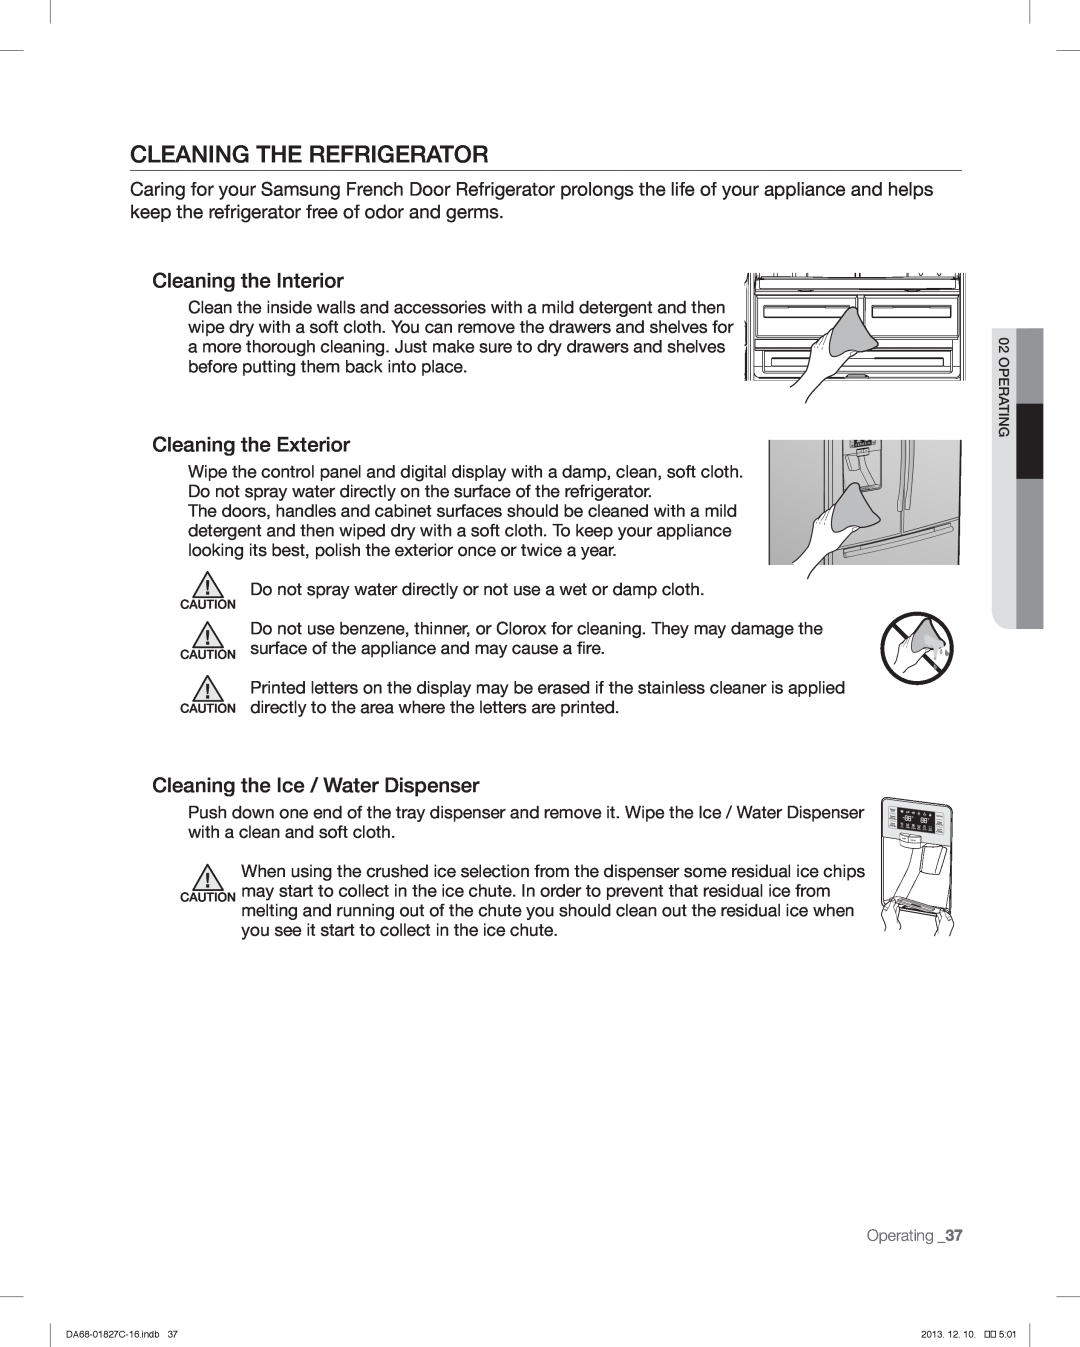 Samsung RFG237AARS user manual Cleaning The Refrigerator, Cleaning the Interior, Cleaning the Exterior 